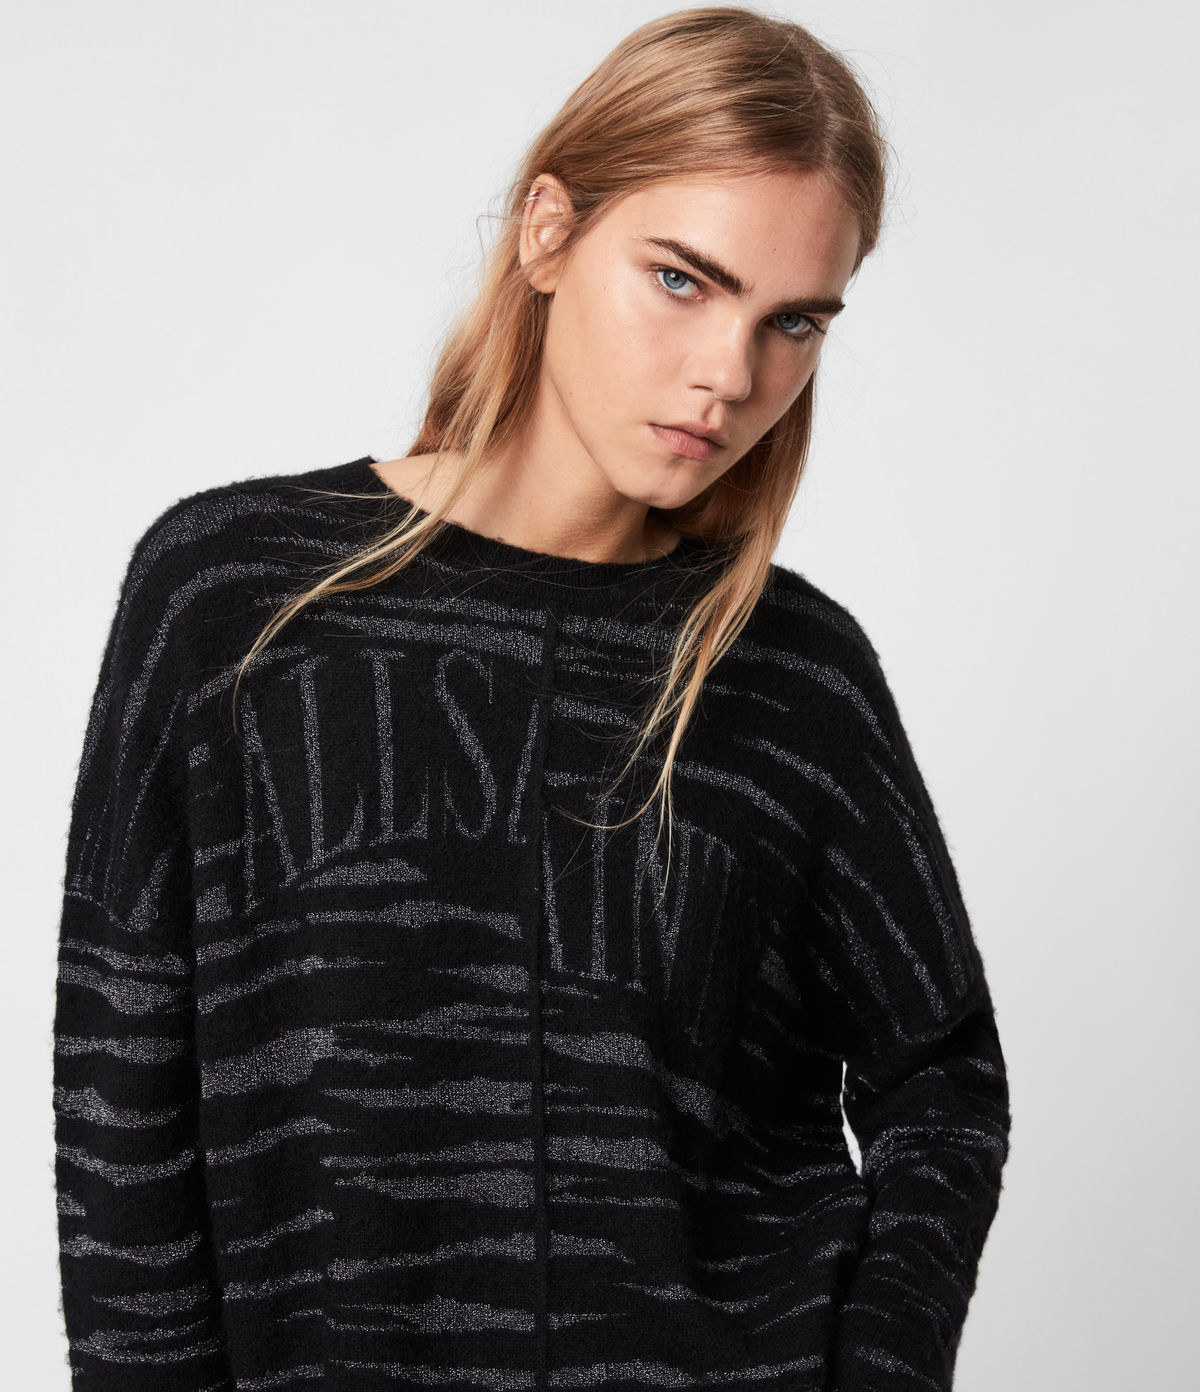 a model in a black and grey tiger print sweater with all saints written on the front